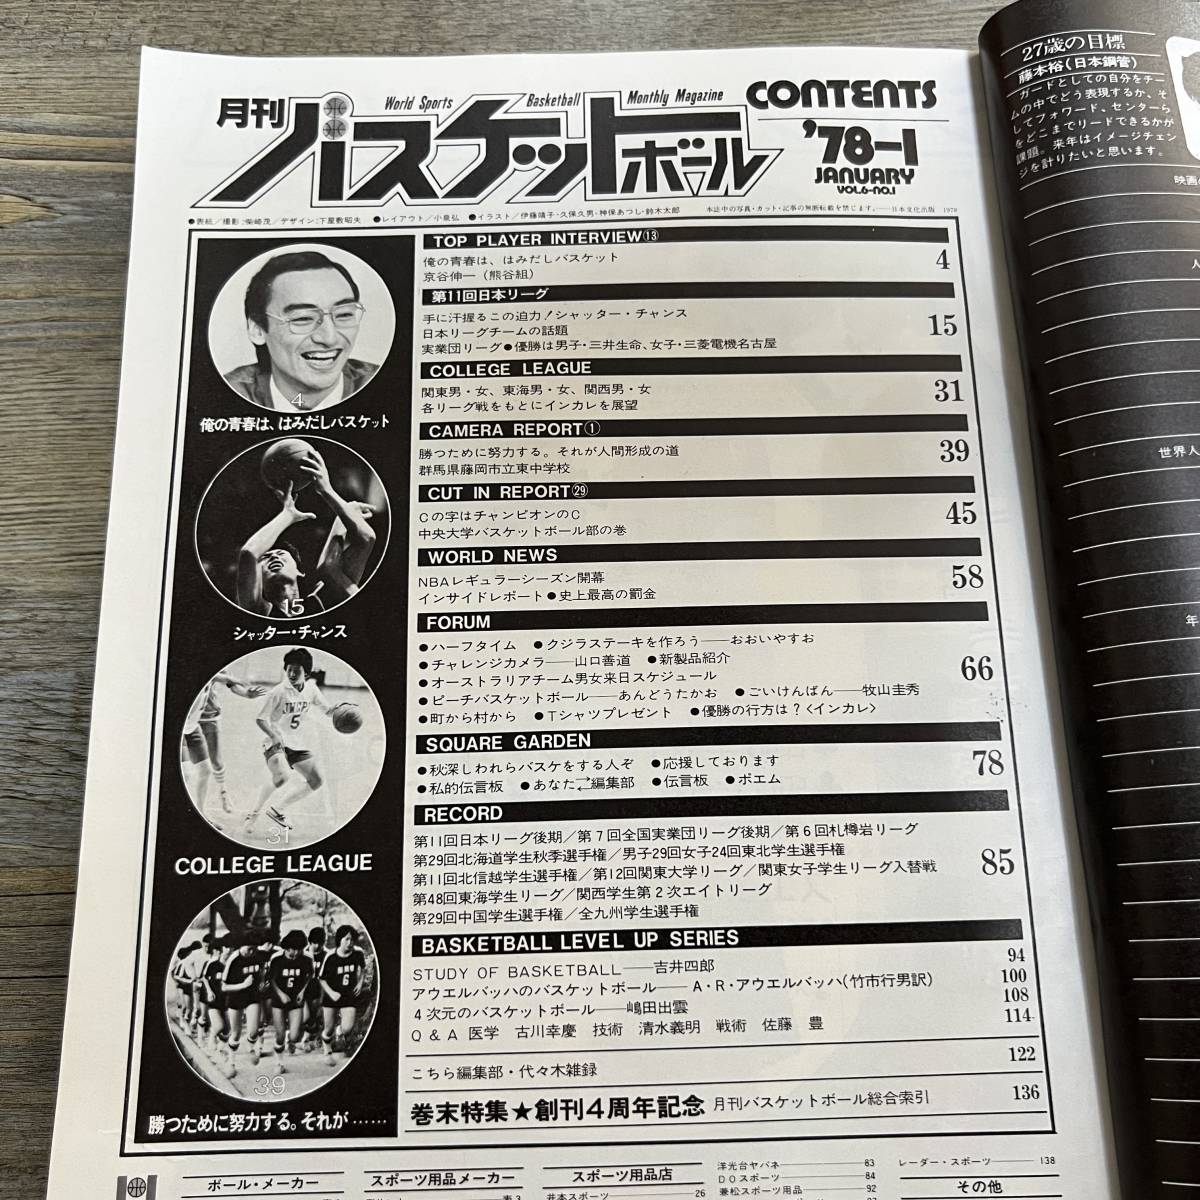 S-3145# monthly basketball 1978 year 1 month number # no. 11 times Japan Lee g capital .. one # day text . publish # Showa era 53 year 1 month 25 day issue #